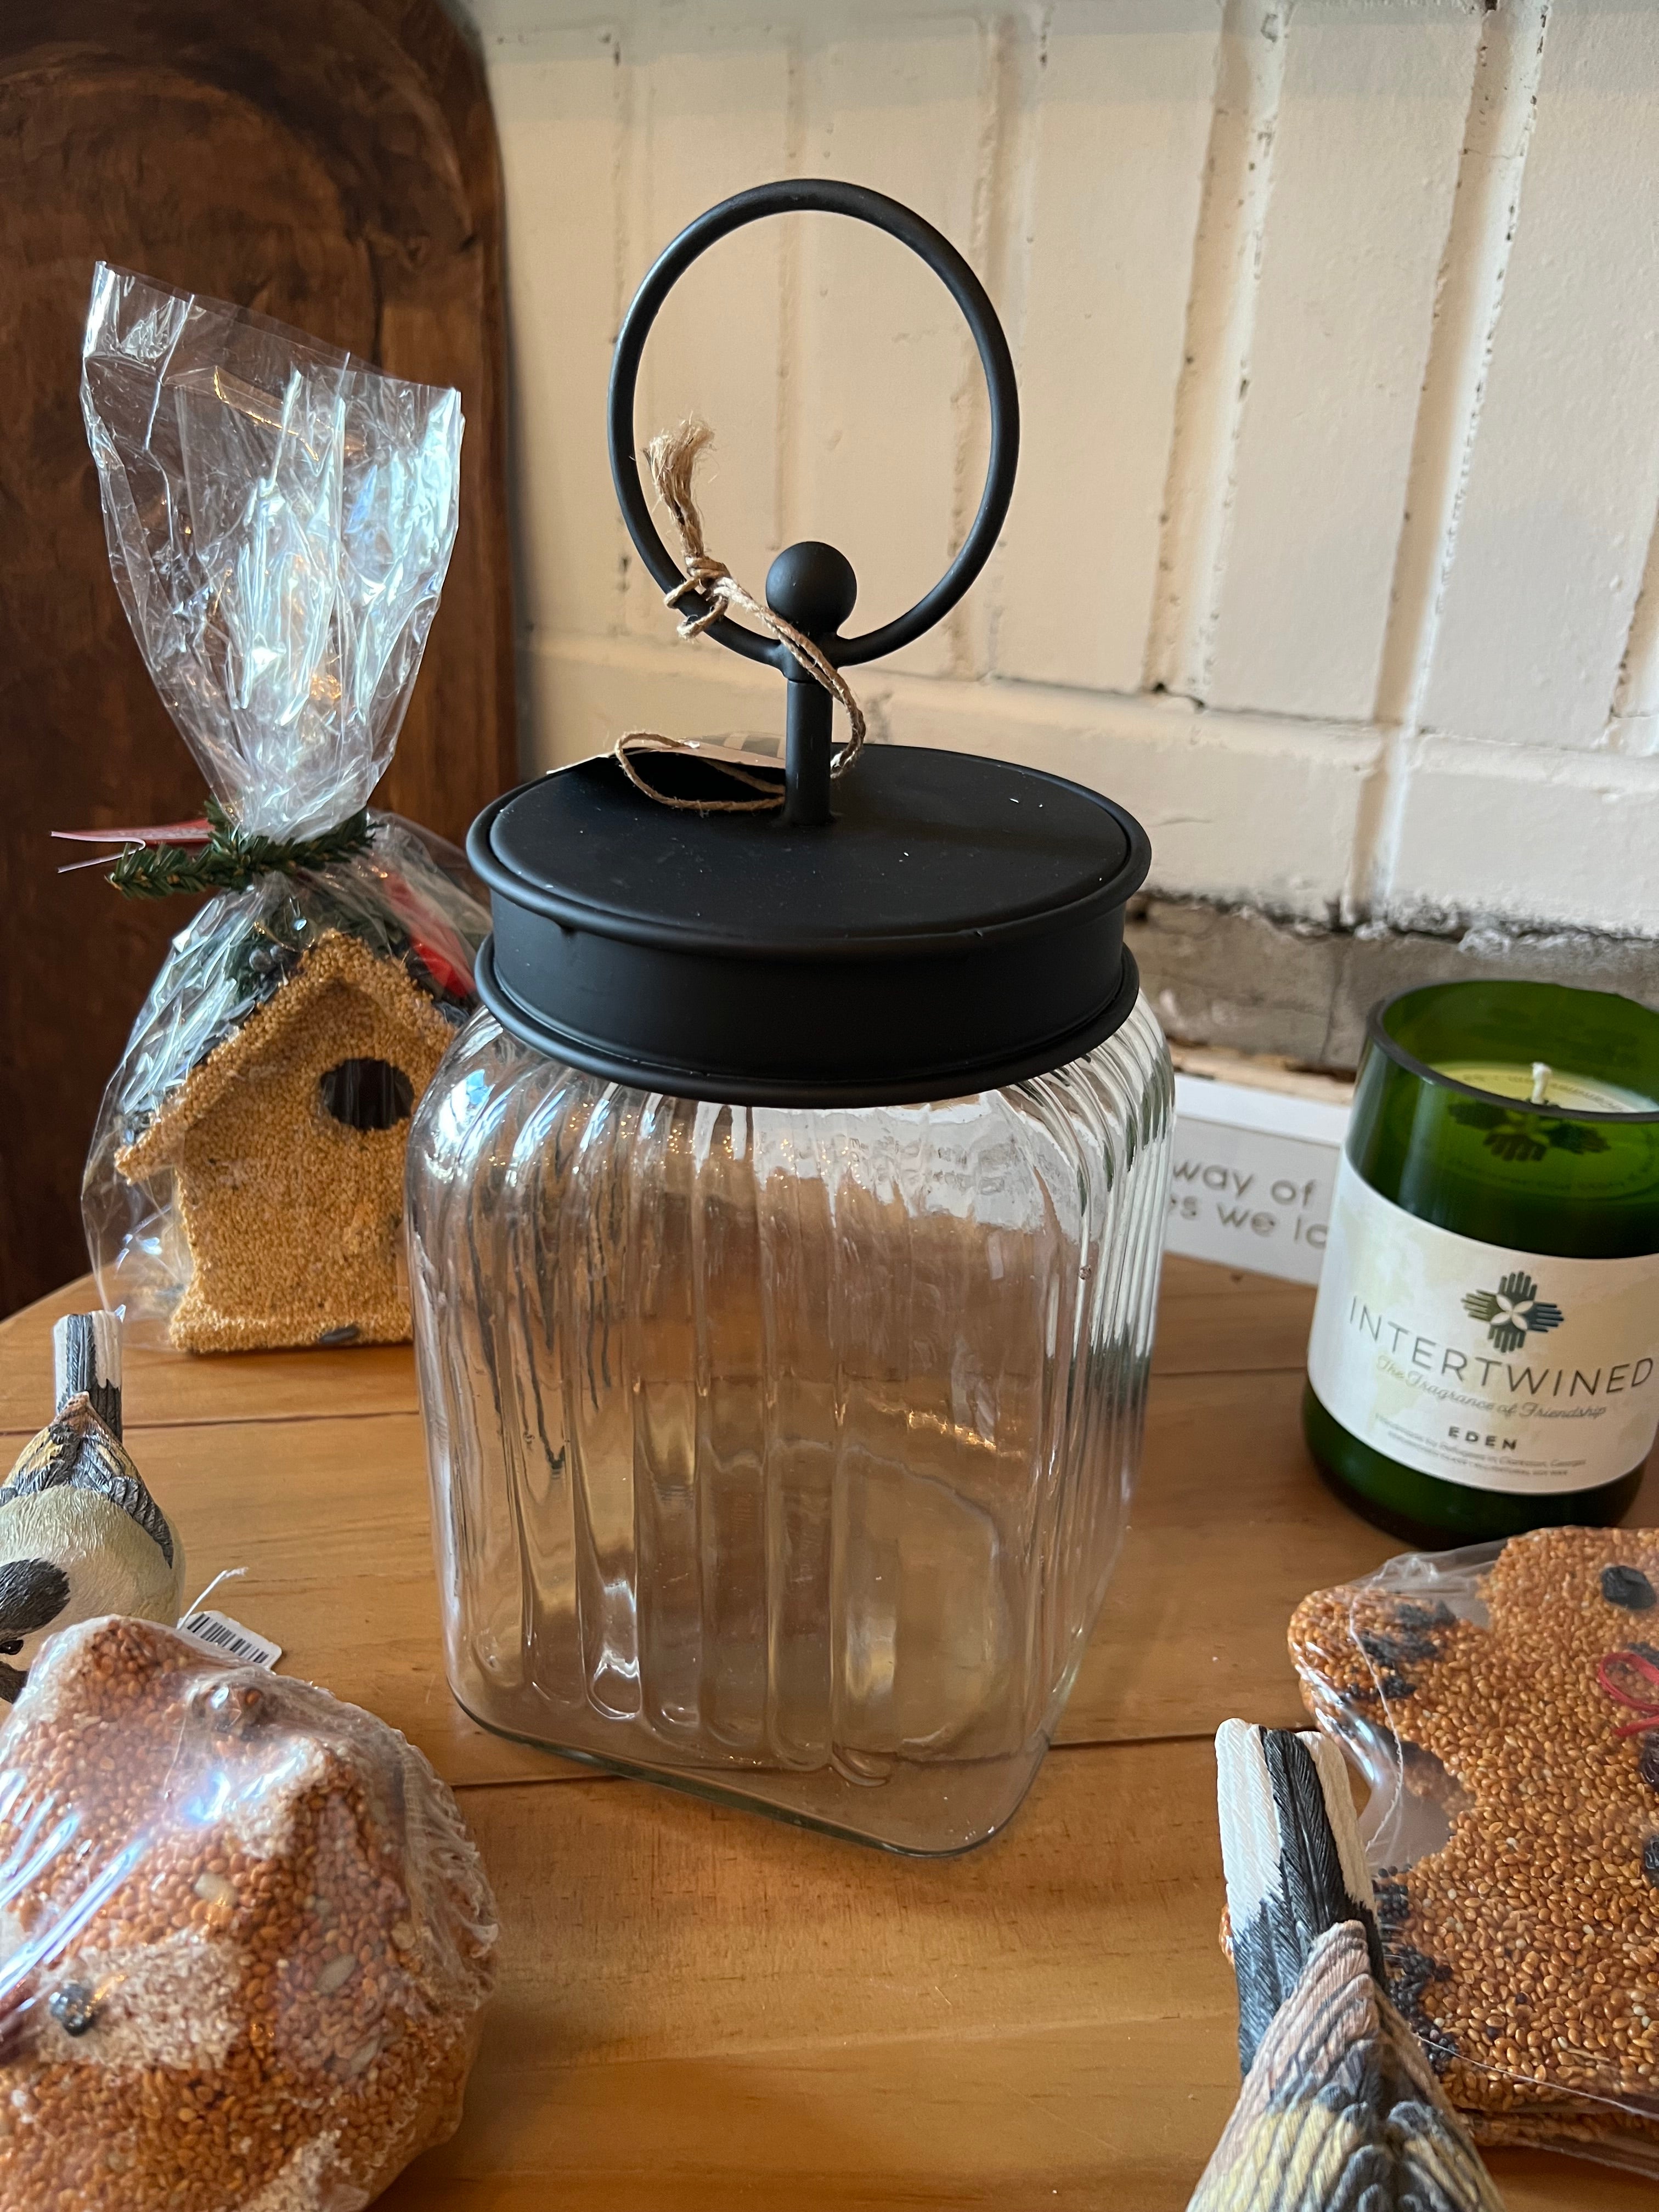 This Black Ridged Glass Jar is a great way to store and display your treats or candies. It stands 12" tall with a base of 5" x 5", making it a great addition to any tabletop. Plus, you can buy other finials to spruce up the look. Buy today to enjoy the classic design and versatile functionality.